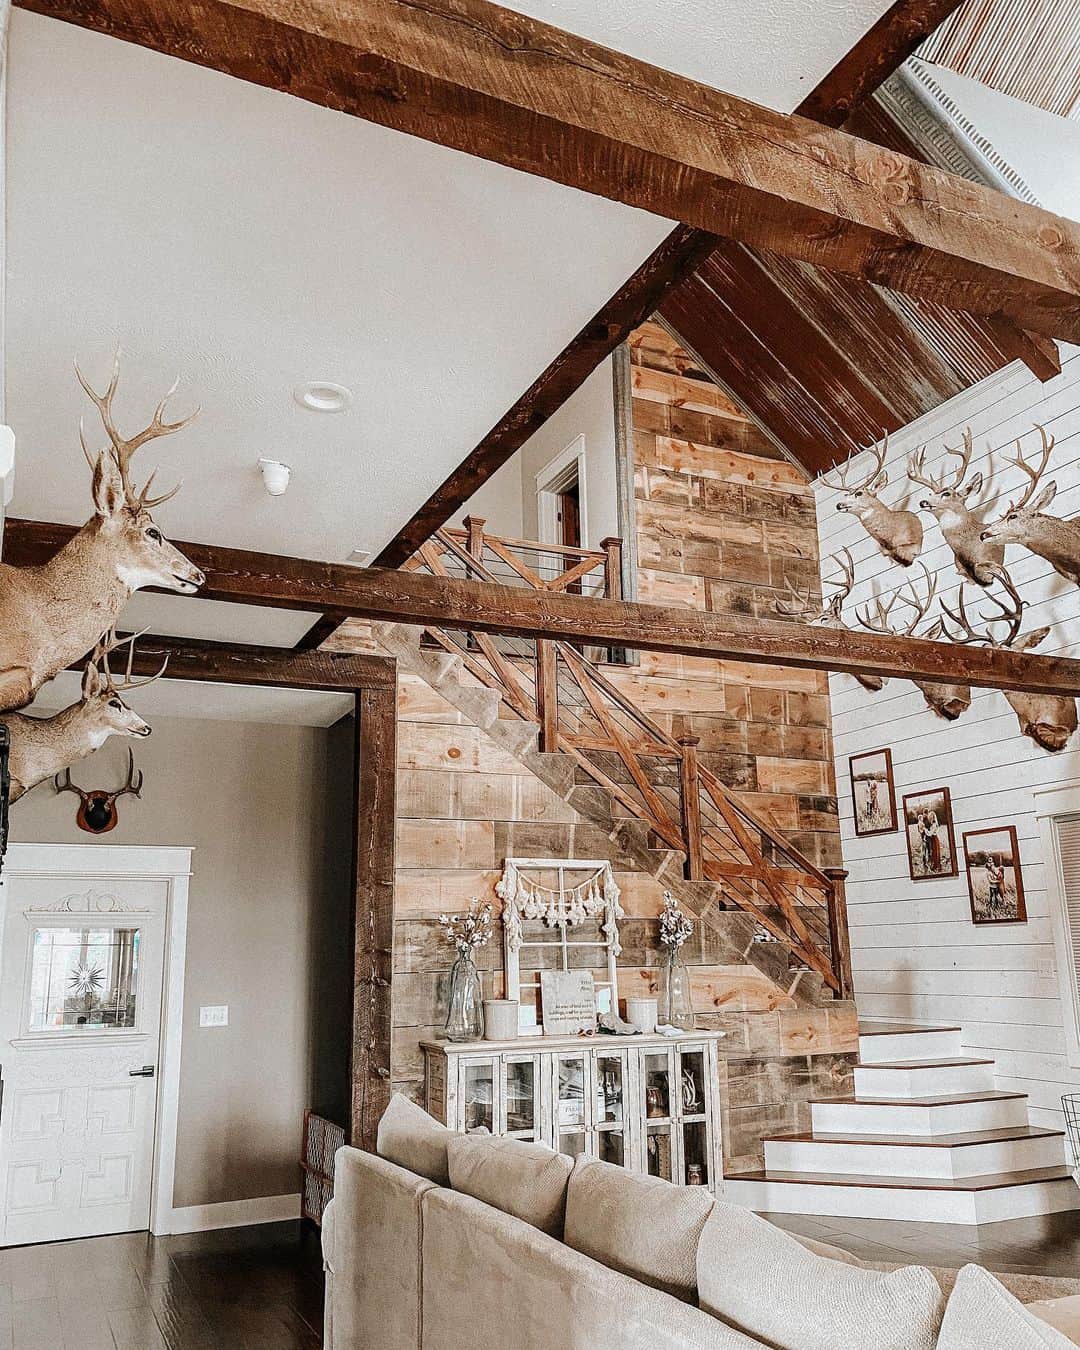 Western Decor and Vaulted Ceilings